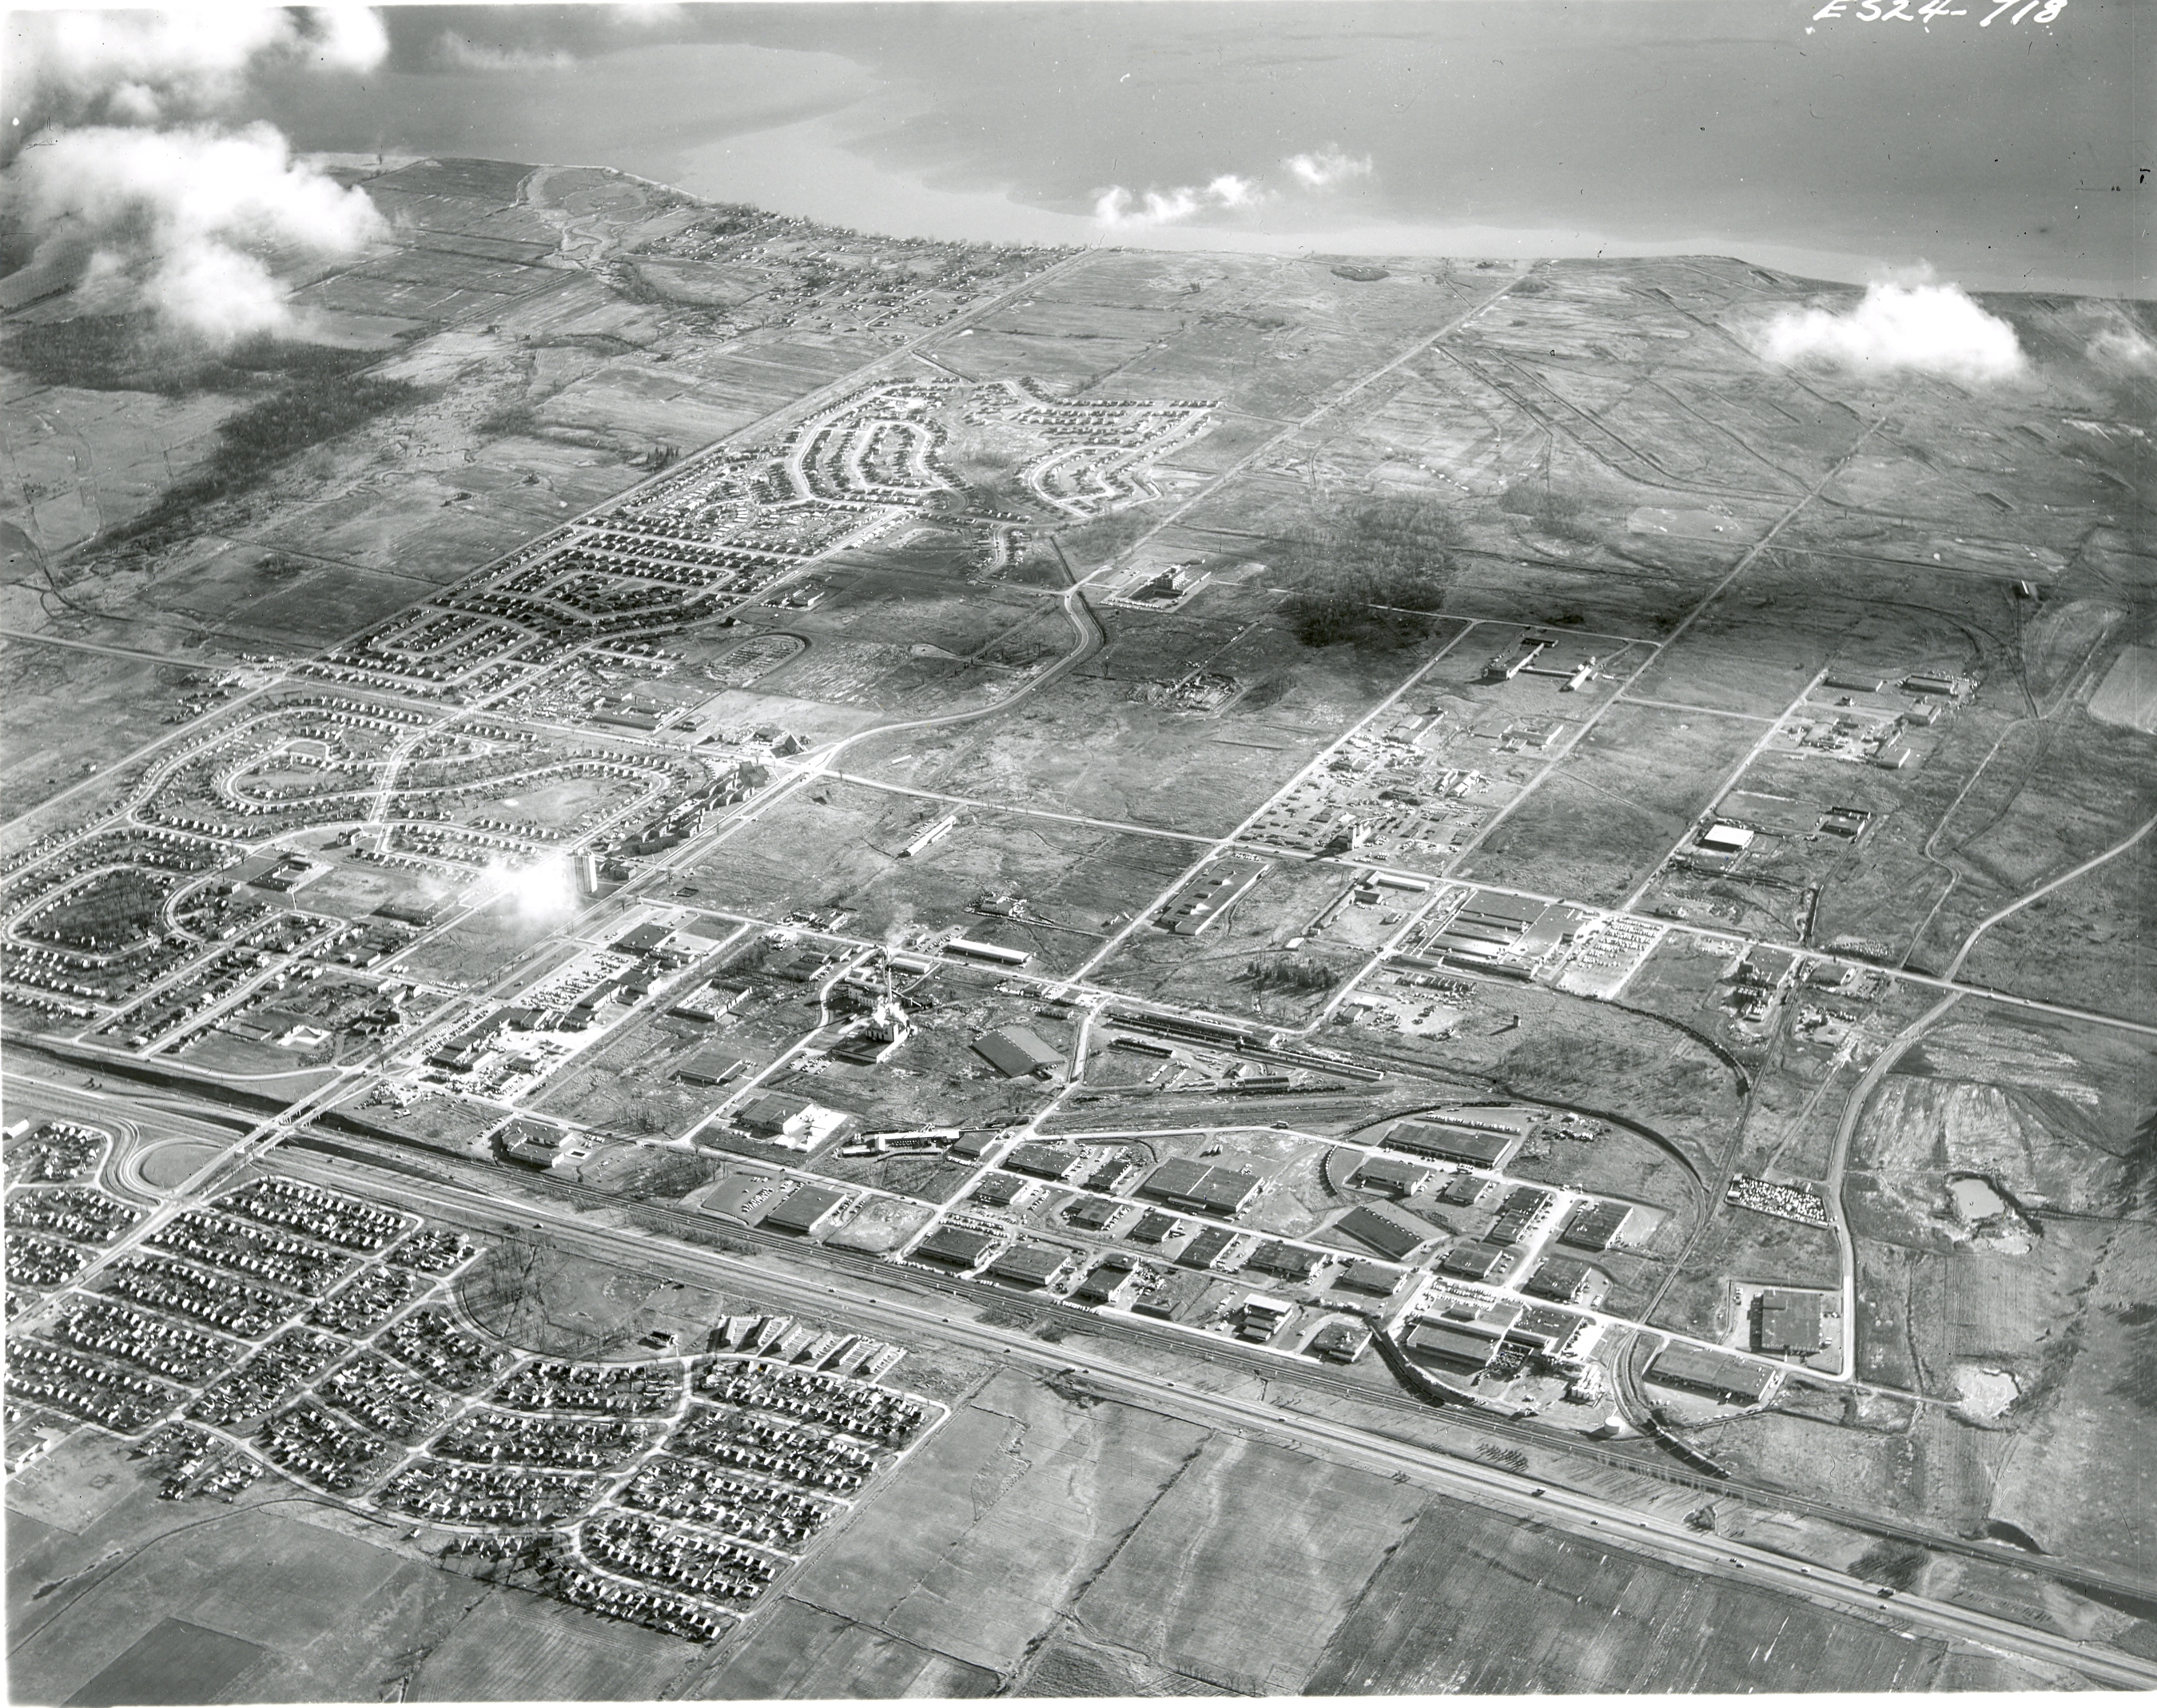 A black and white photo of an aerial view of South Ajax in 1966.